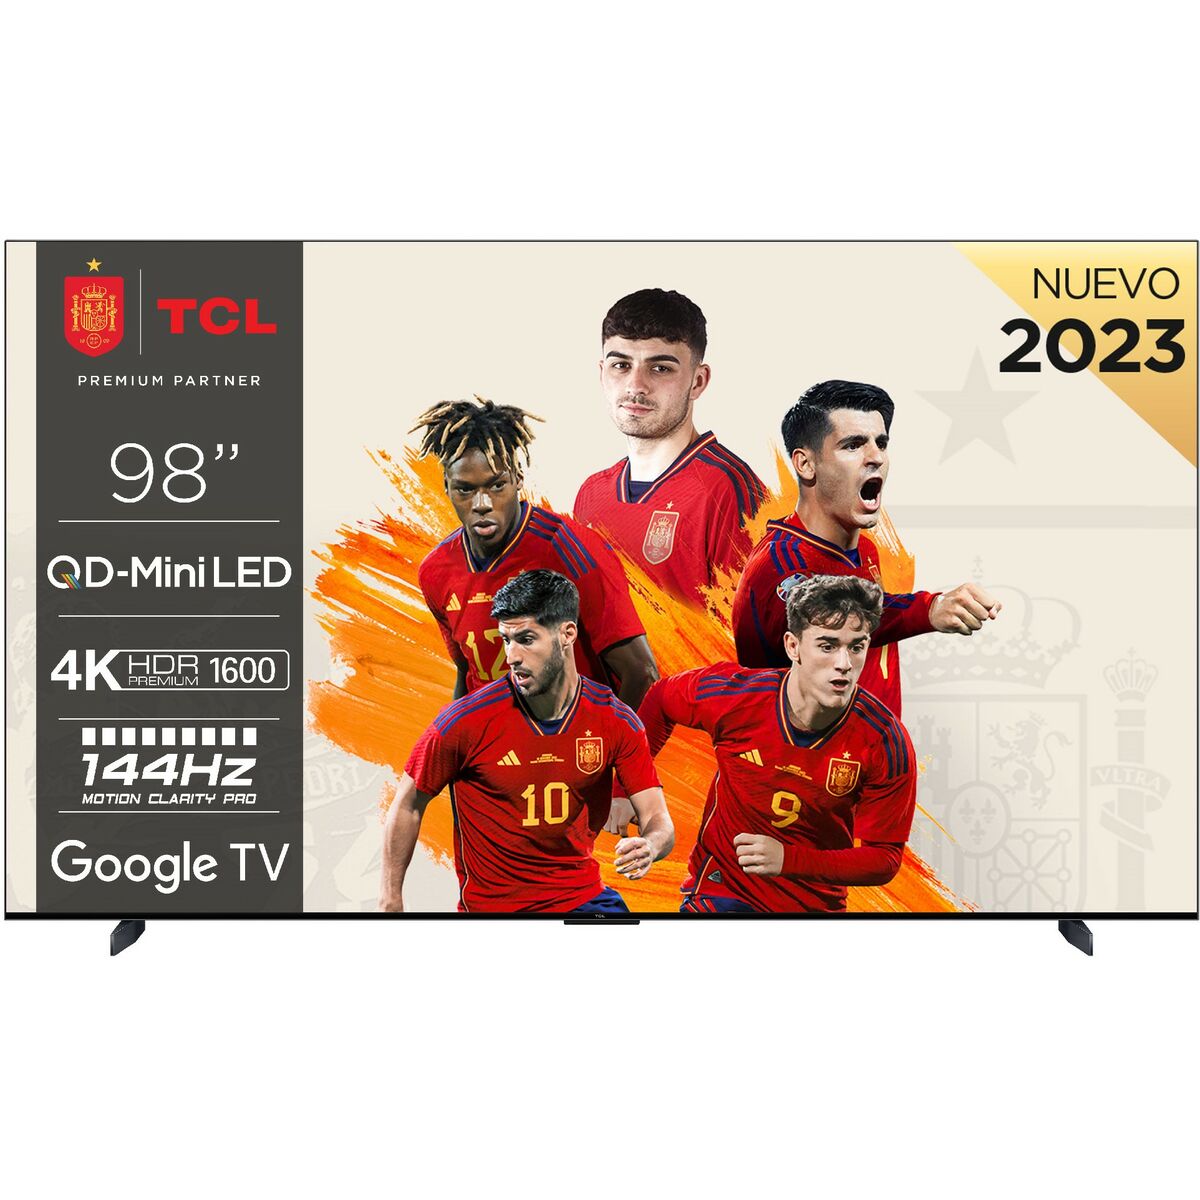 Smart TV TCL 98C805 98" 4K Ultra HD LED AMD FreeSync, TCL, Electronics, TV, Video and home cinema, smart-tv-tcl-98c805-98-4k-ultra-hd-led-amd-freesync, :98 INCHES or 248.92 CM, :AMD Freesync, :QLED, :RN ELITE, :Ultra HD, Brand_TCL, category-reference-2609, category-reference-2625, category-reference-2931, category-reference-t-18805, category-reference-t-18827, category-reference-t-19653, cinema and television, Condition_NEW, entertainment, Price_+ 1000, RiotNook